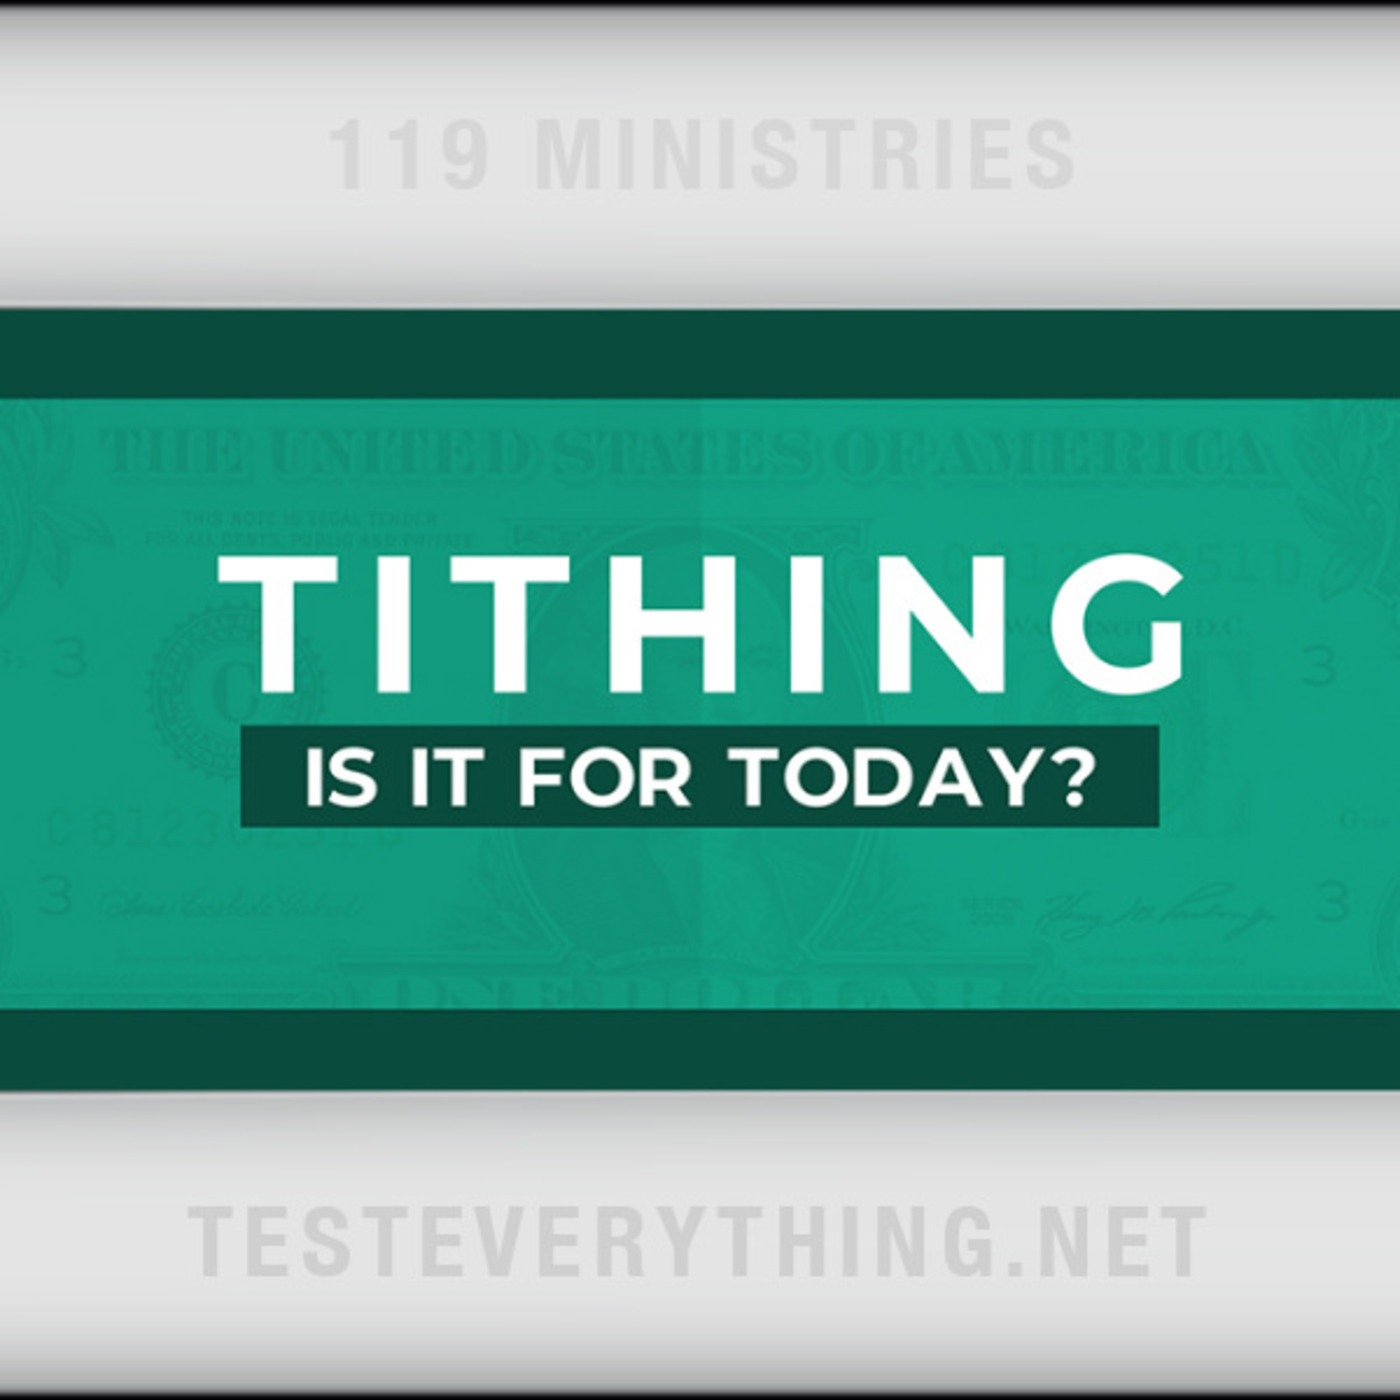 Tithing: Is It For Today?